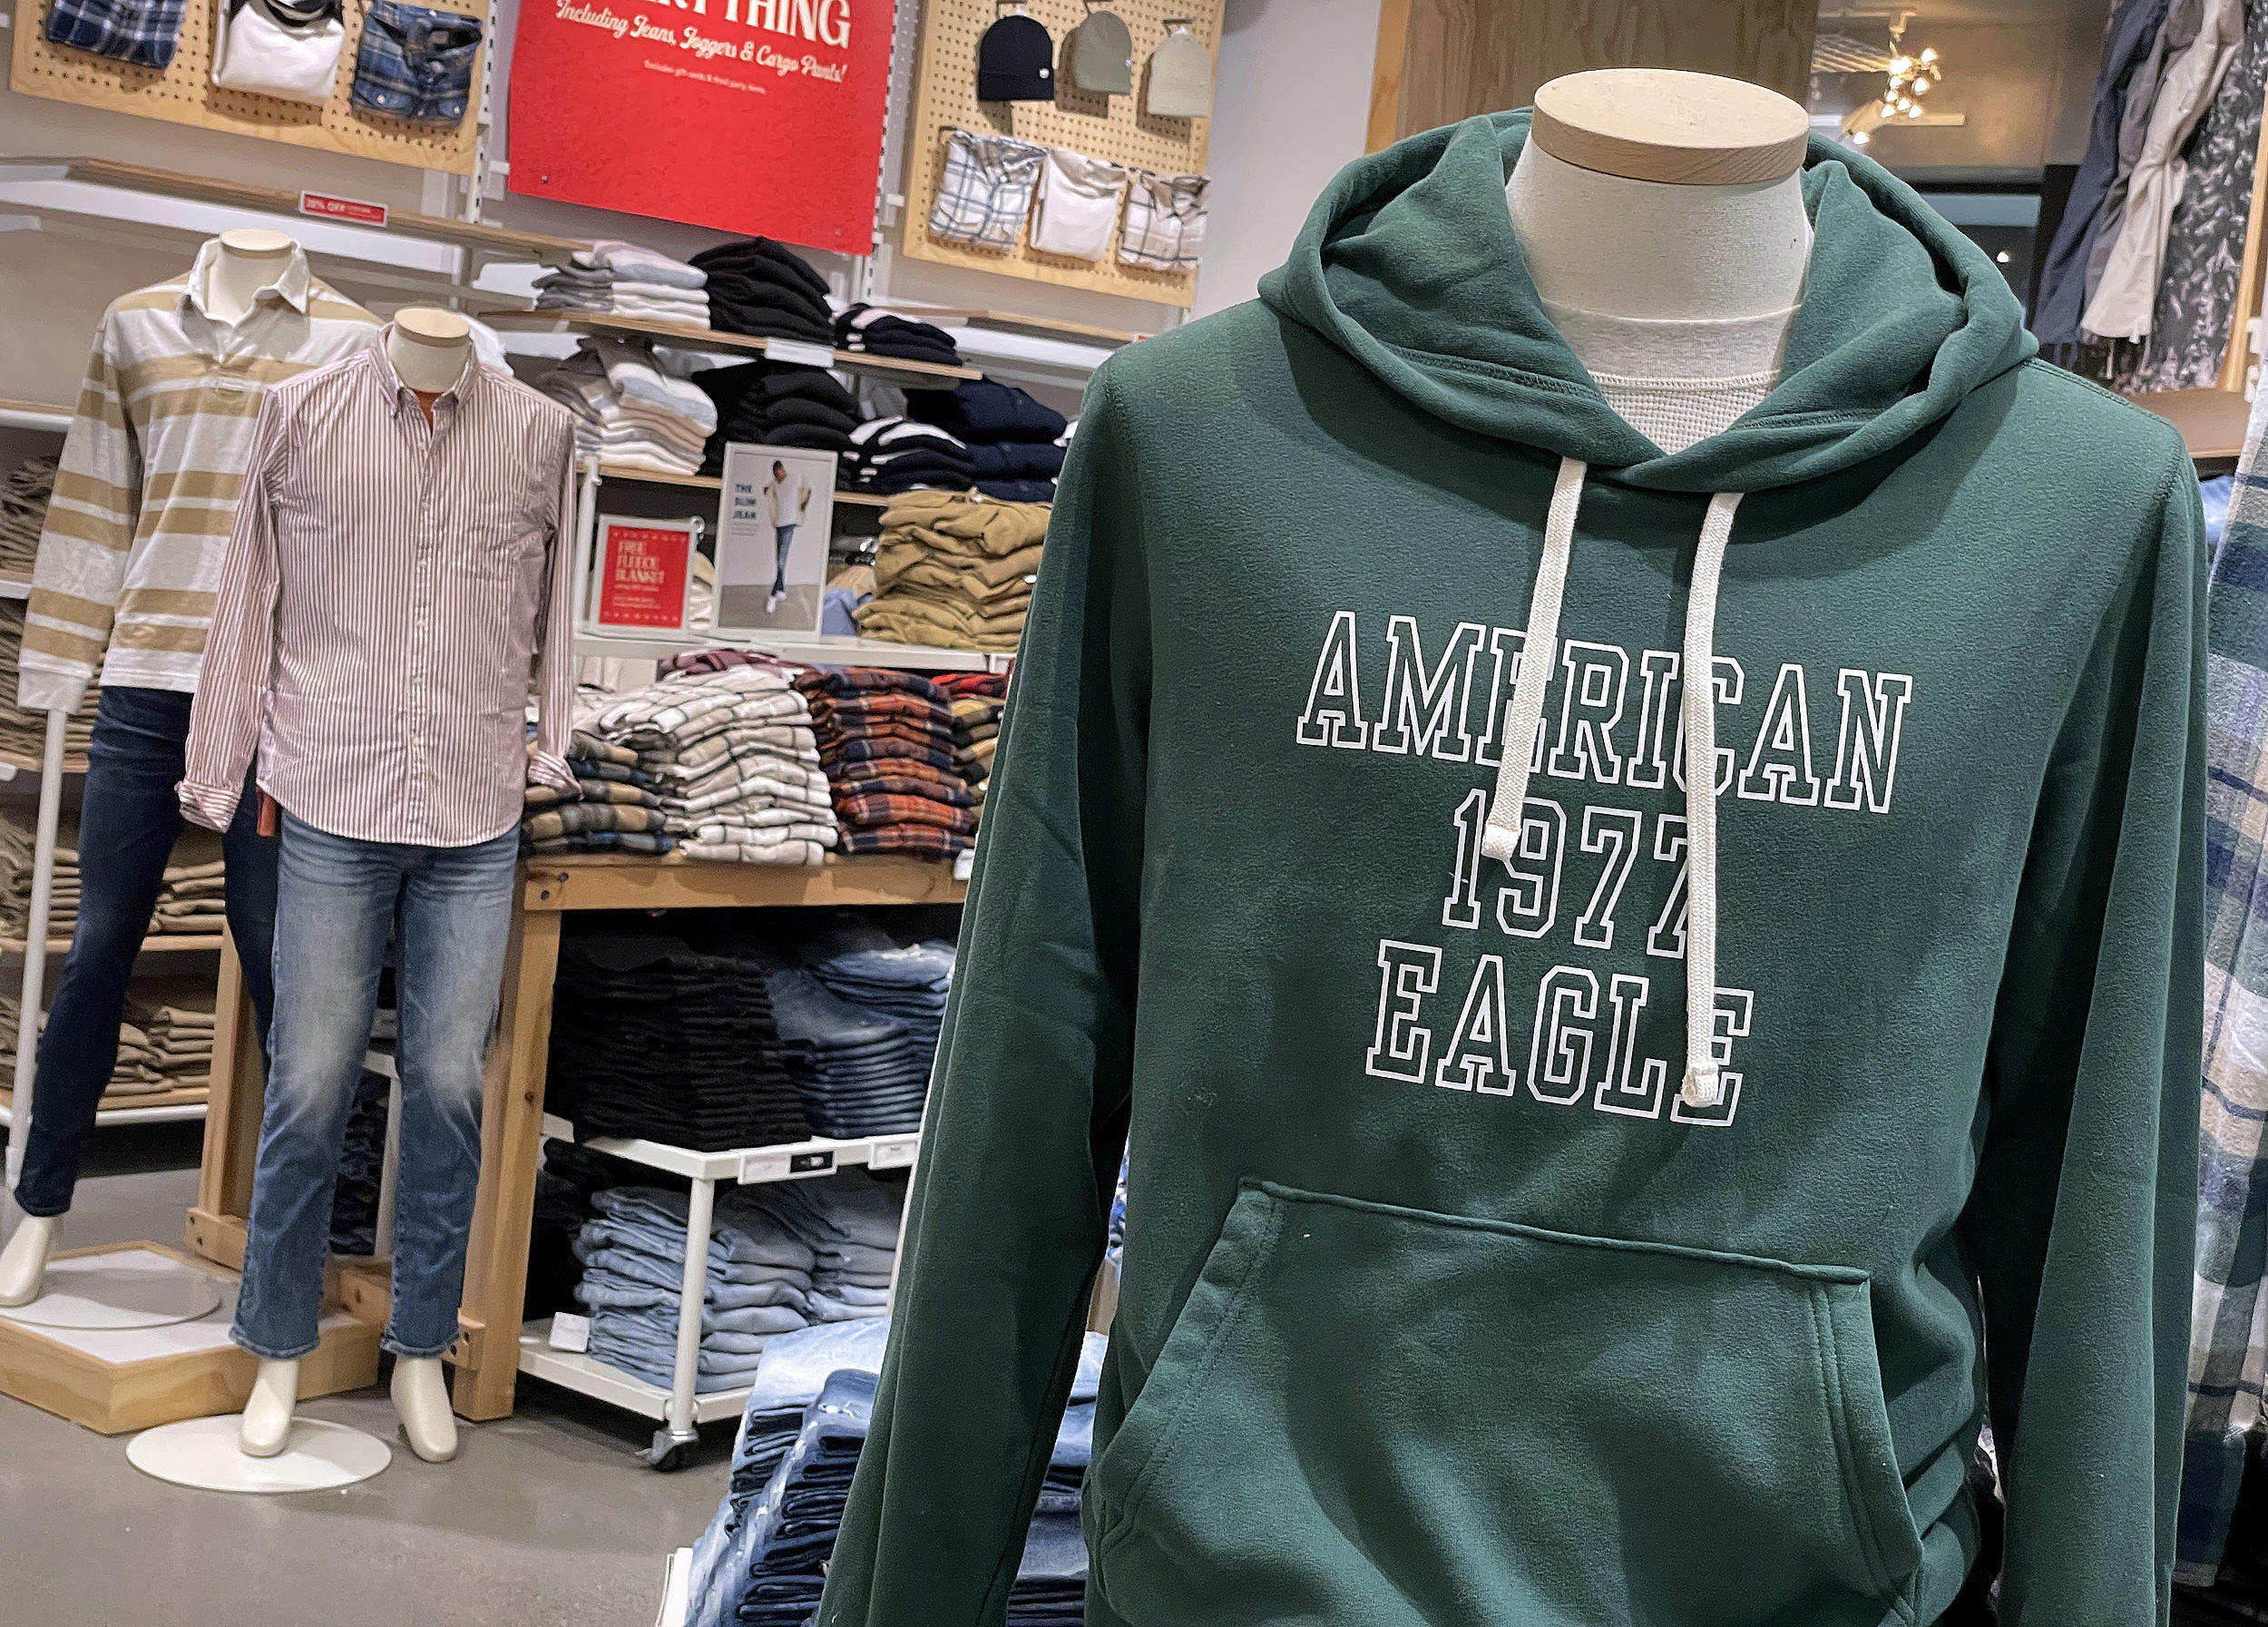 MOST-LOVED JEANS AT AMERICAN EAGLE OUTFITTERS - Shopping Mall in Eatontown,  NJ